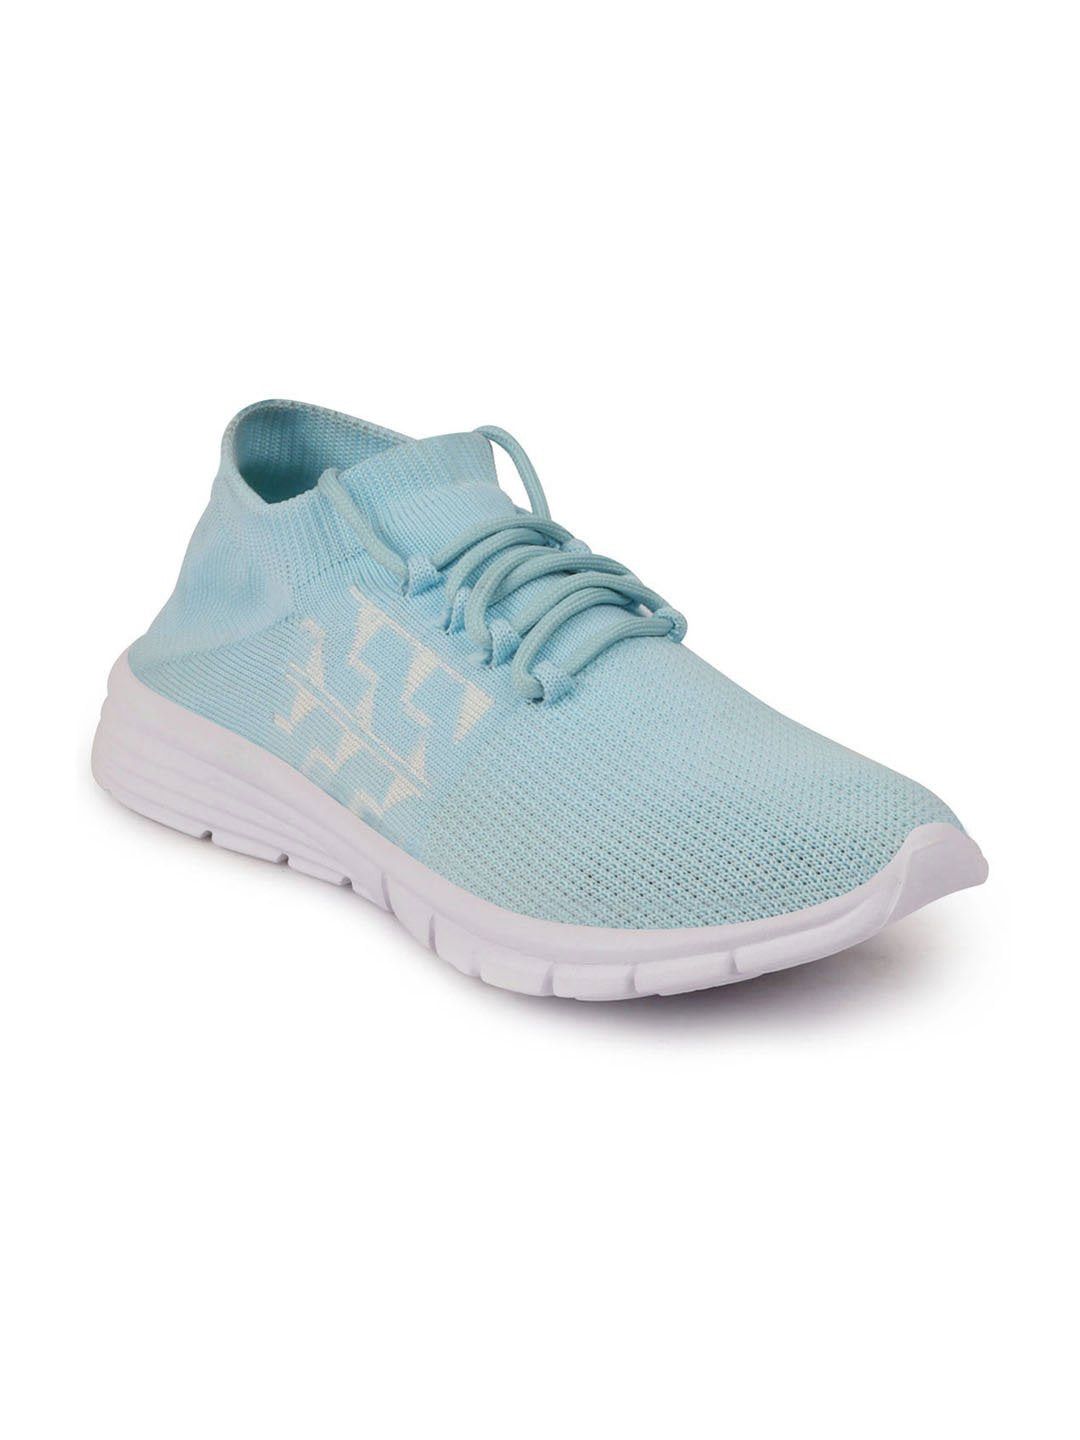 FAUSTO Women Blue Mesh Non-Marking Running Shoes Price in India